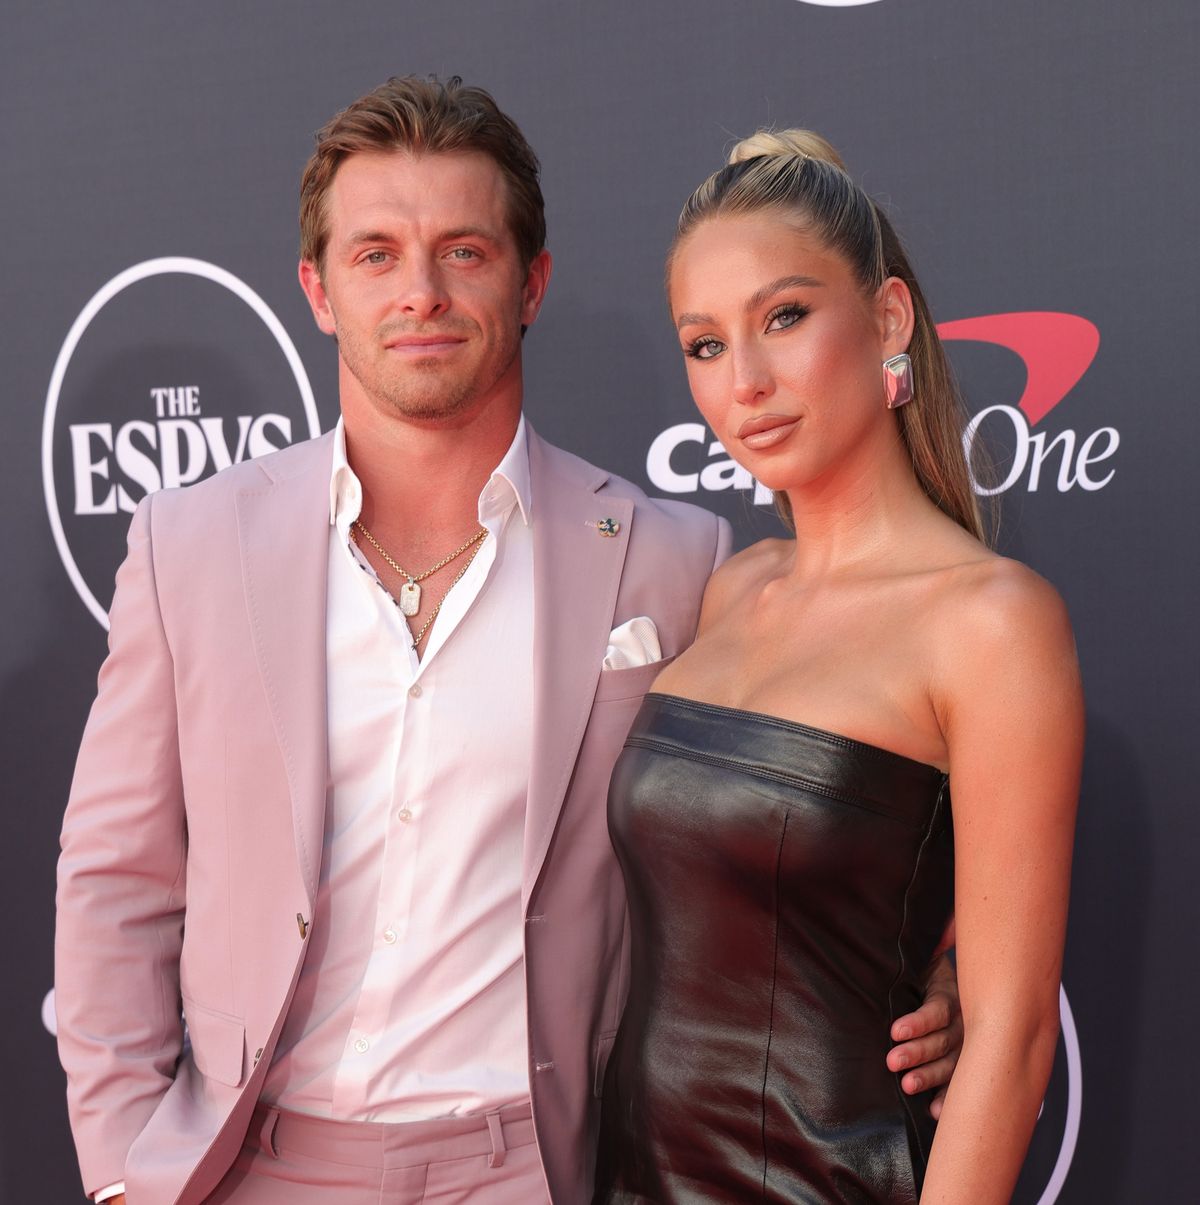 What Happened Between TikTok Star Alix Earle and MLB's Tyler Wade?  Relationship and Split Details